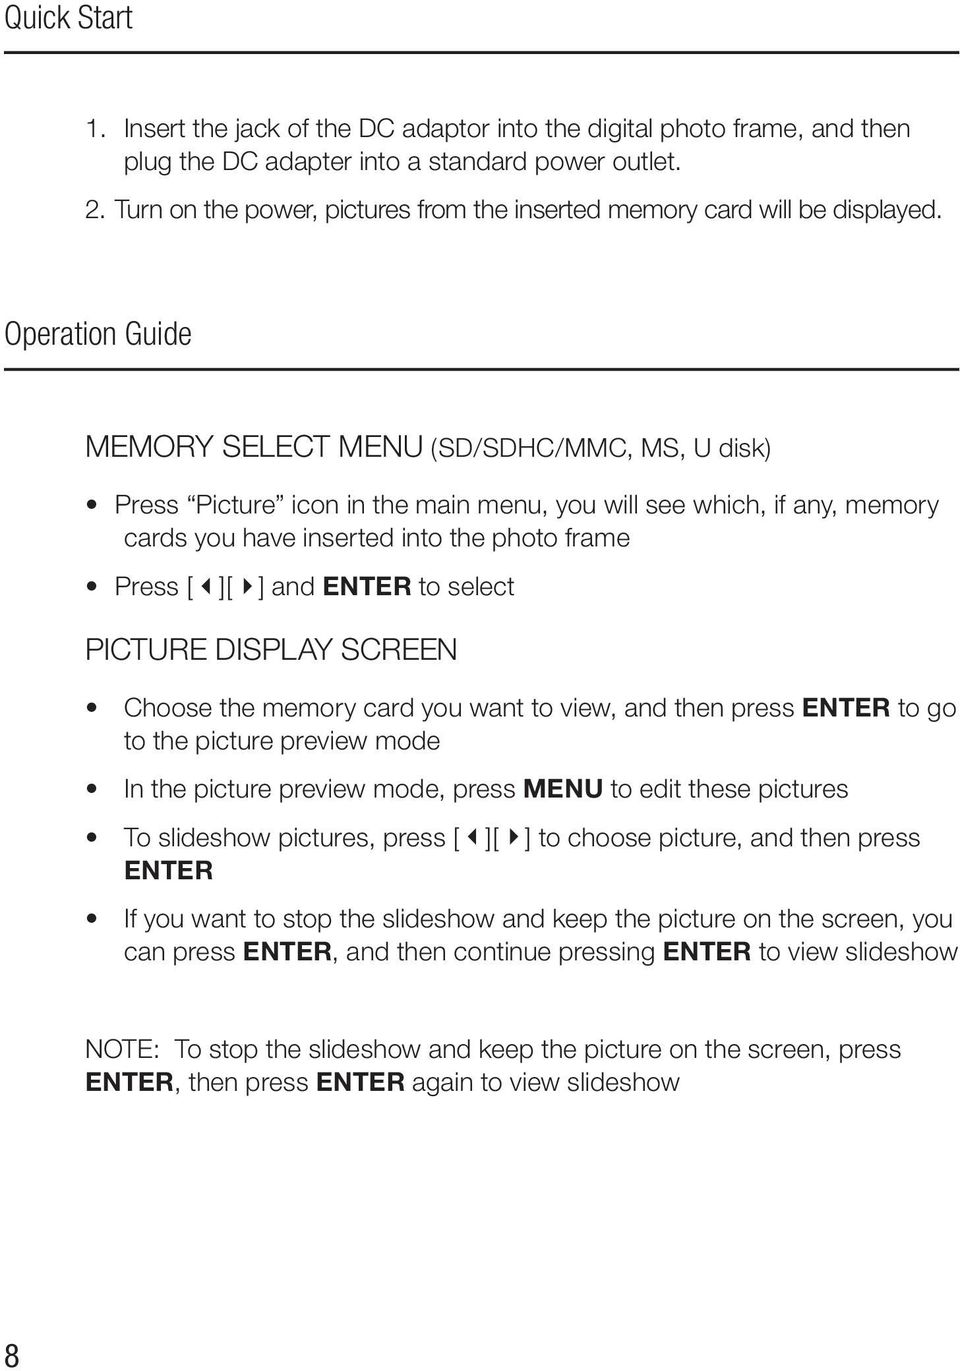 Operation Guide Memory Select Menu (SD/SDHC/MMC, MS, U disk) Press Picture icon in the main menu, you will see which, if any, memory cards you have inserted into the photo frame Press [ ][ ] and